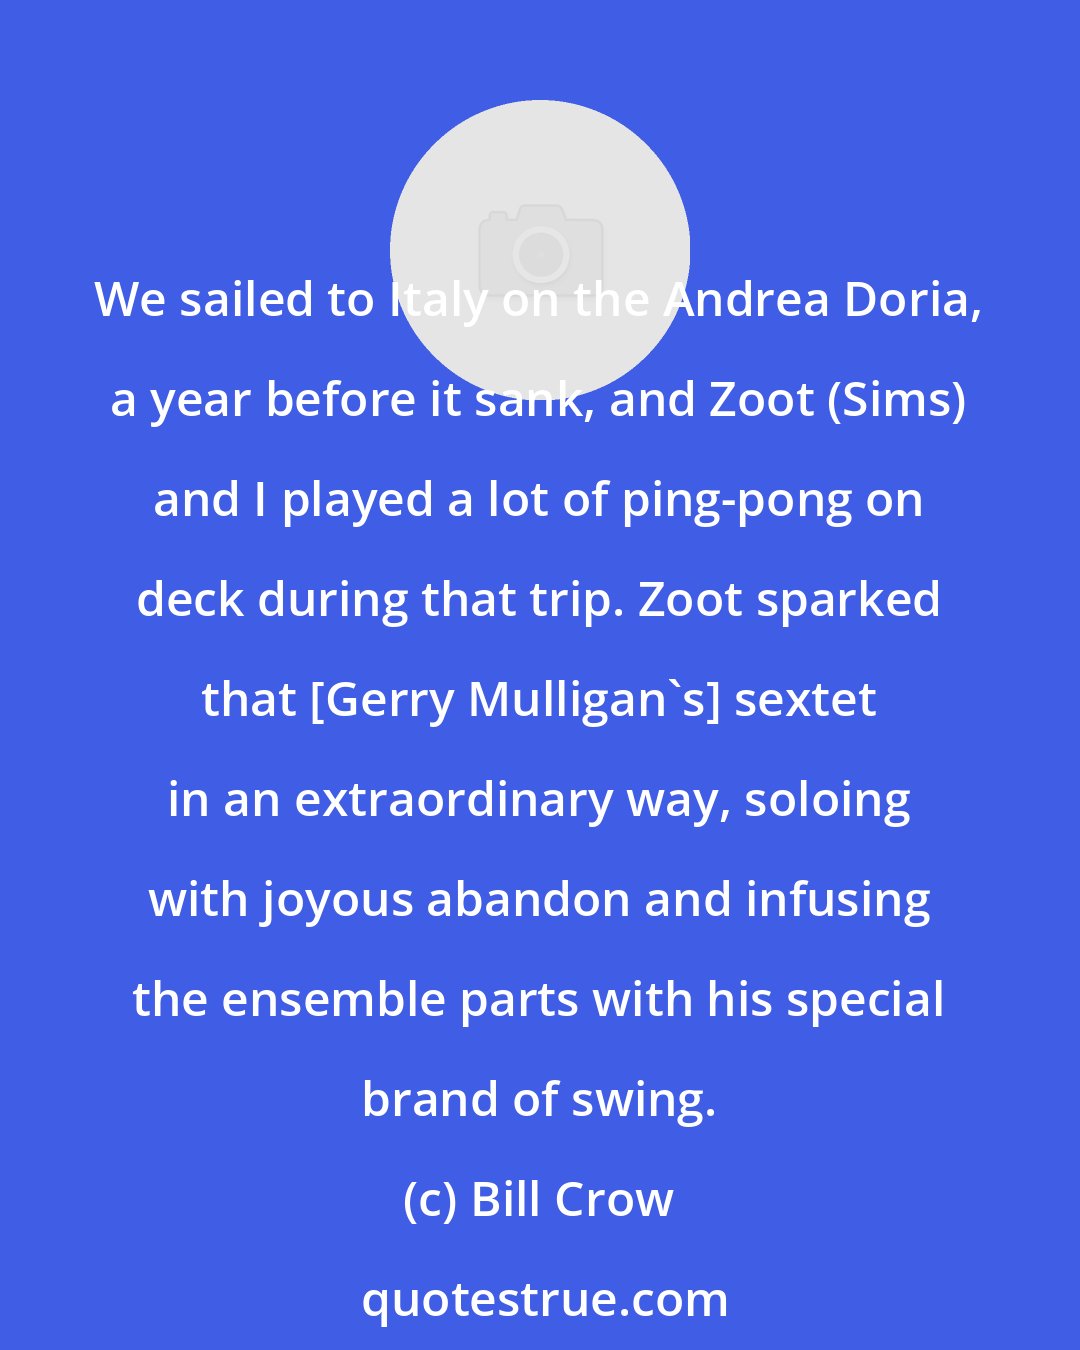 Bill Crow: We sailed to Italy on the Andrea Doria, a year before it sank, and Zoot (Sims) and I played a lot of ping-pong on deck during that trip. Zoot sparked that [Gerry Mulligan's] sextet in an extraordinary way, soloing with joyous abandon and infusing the ensemble parts with his special brand of swing.